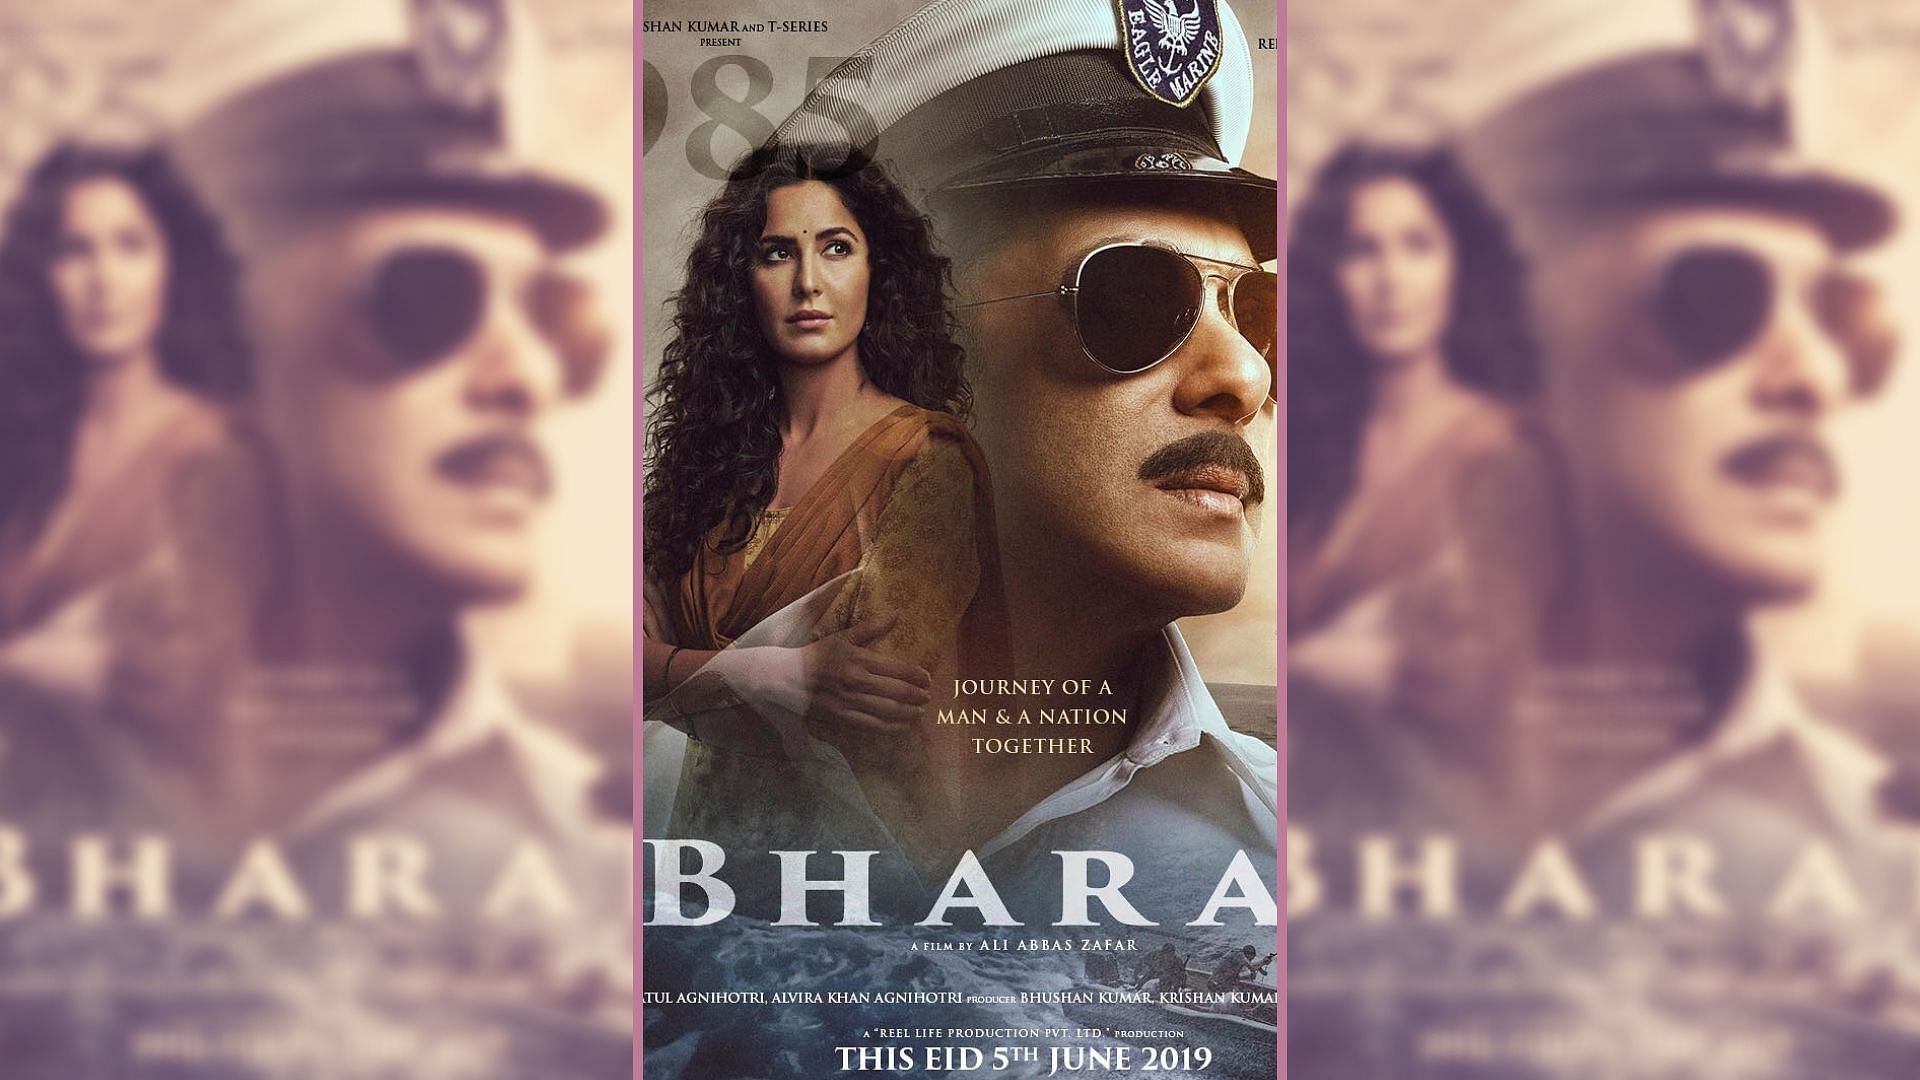 Bharat Box Office Collection Day 1: Salman’s Biggest Eid Opener at Rs 42.30 Crores: A poster for Salman Khan and Katrina Kaif starrer <i>Bharat</i>.